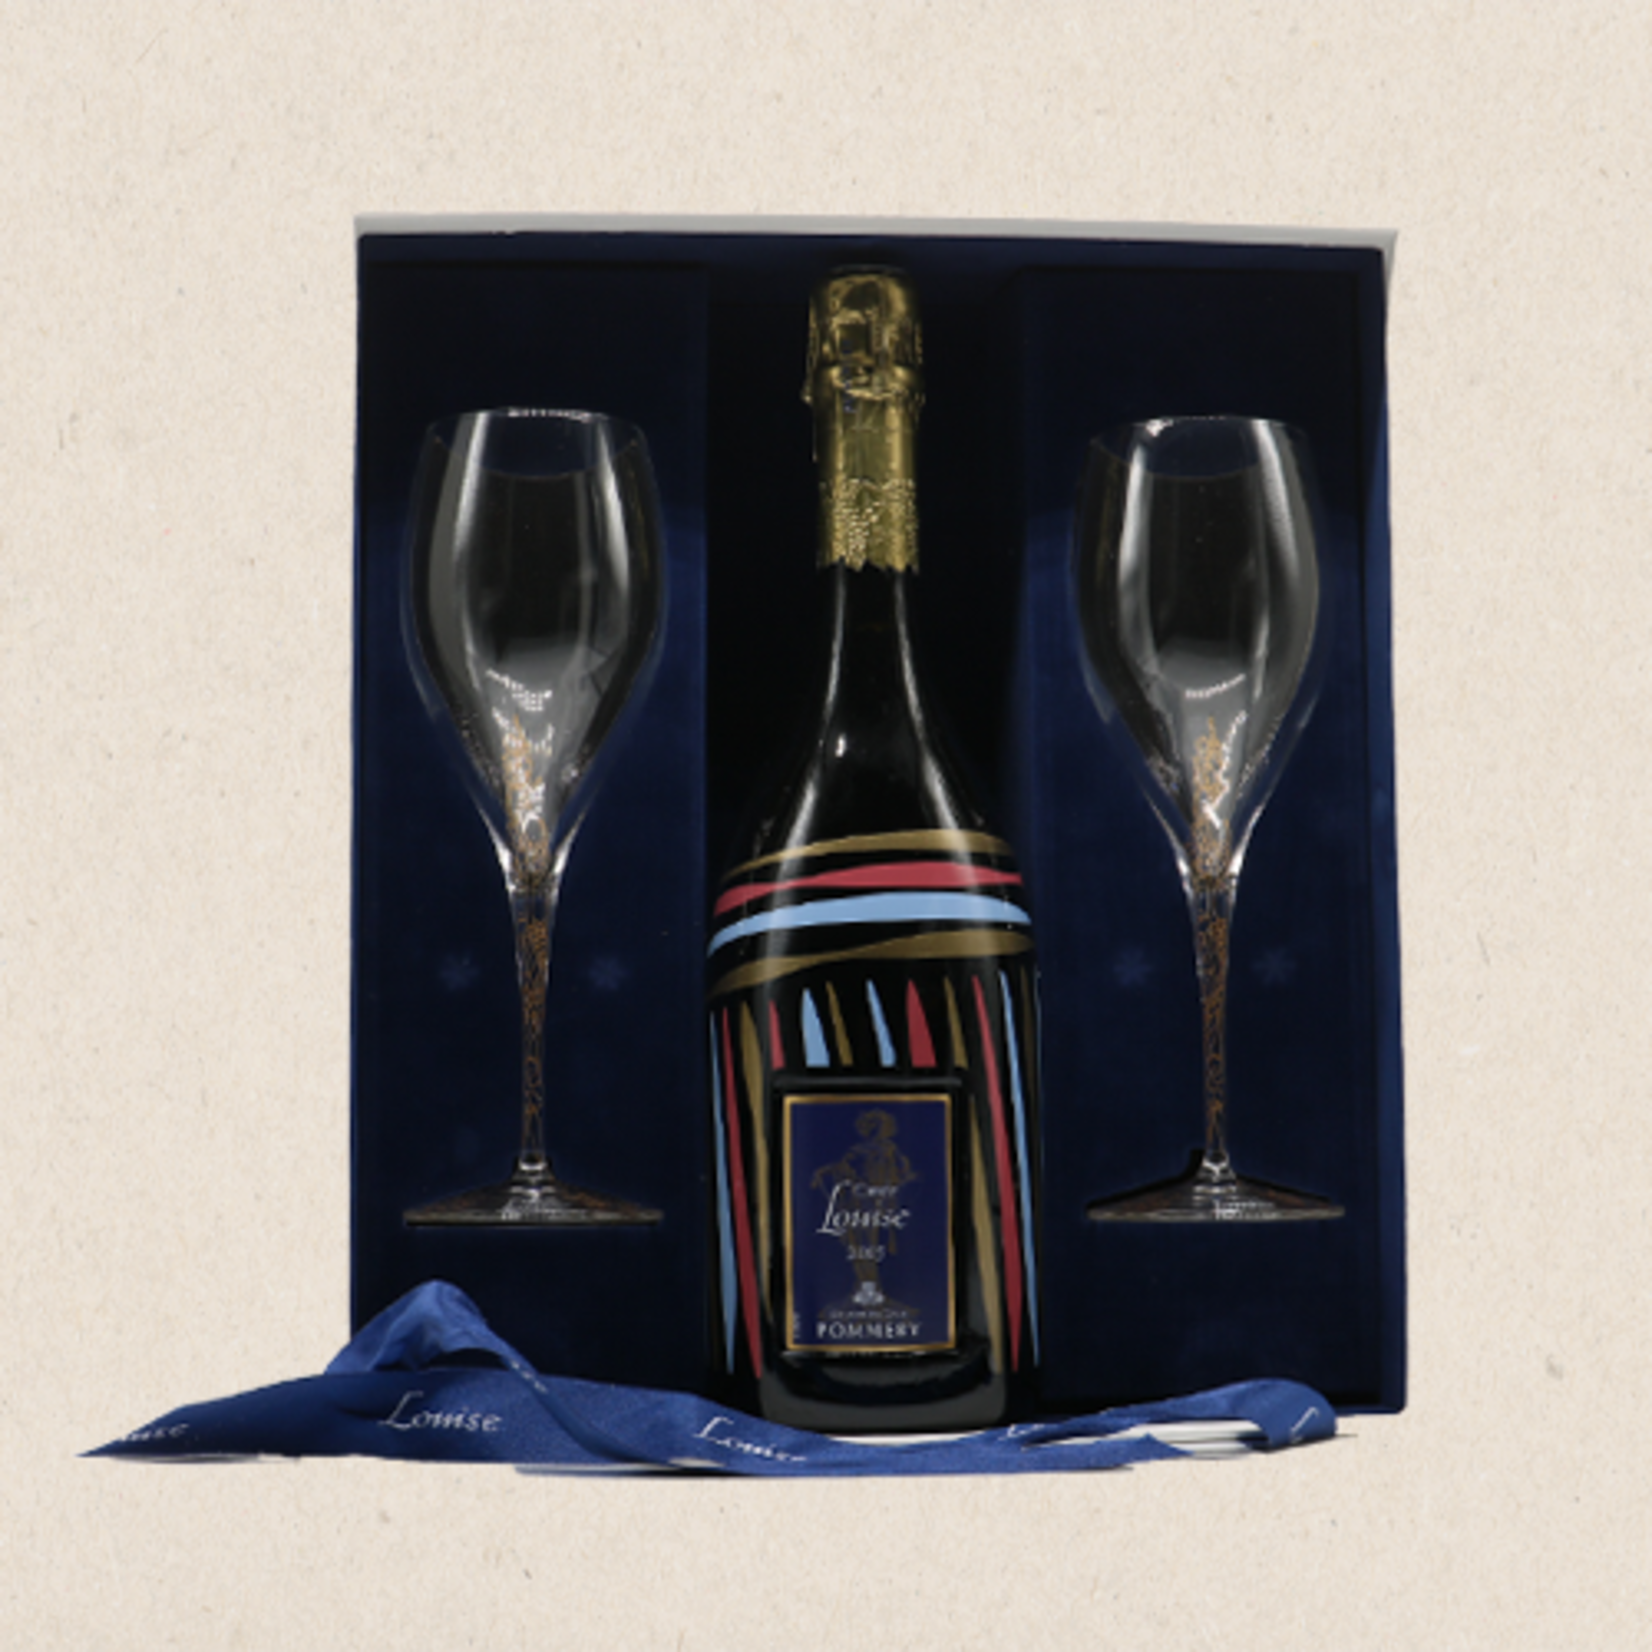 Pommery Vintage 2005 Cuvée Louise (giftbox with 2 glasses)